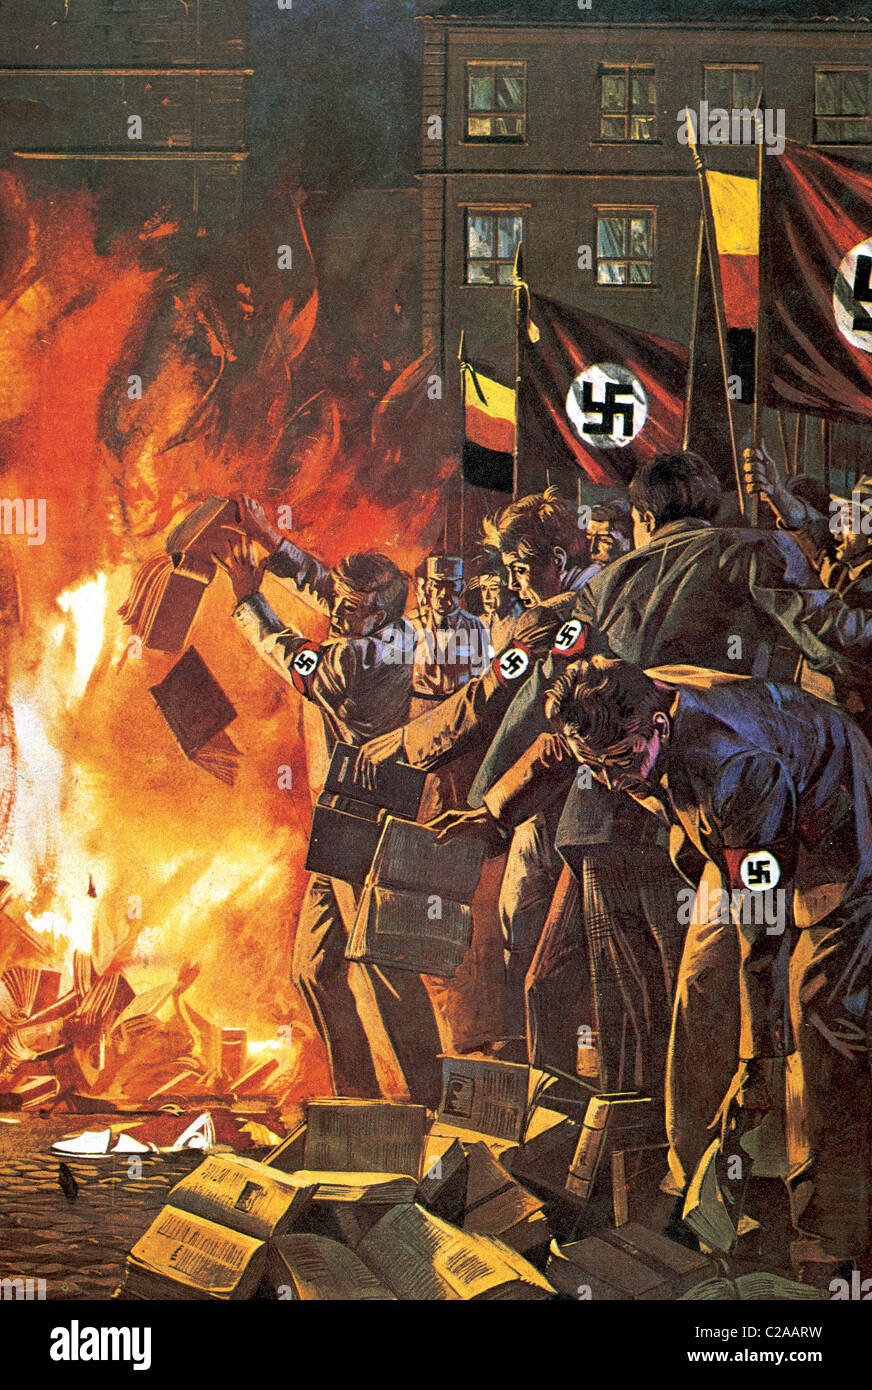 Nazism. Burning of books unrelated with the regime. Drawing. Stock Photo